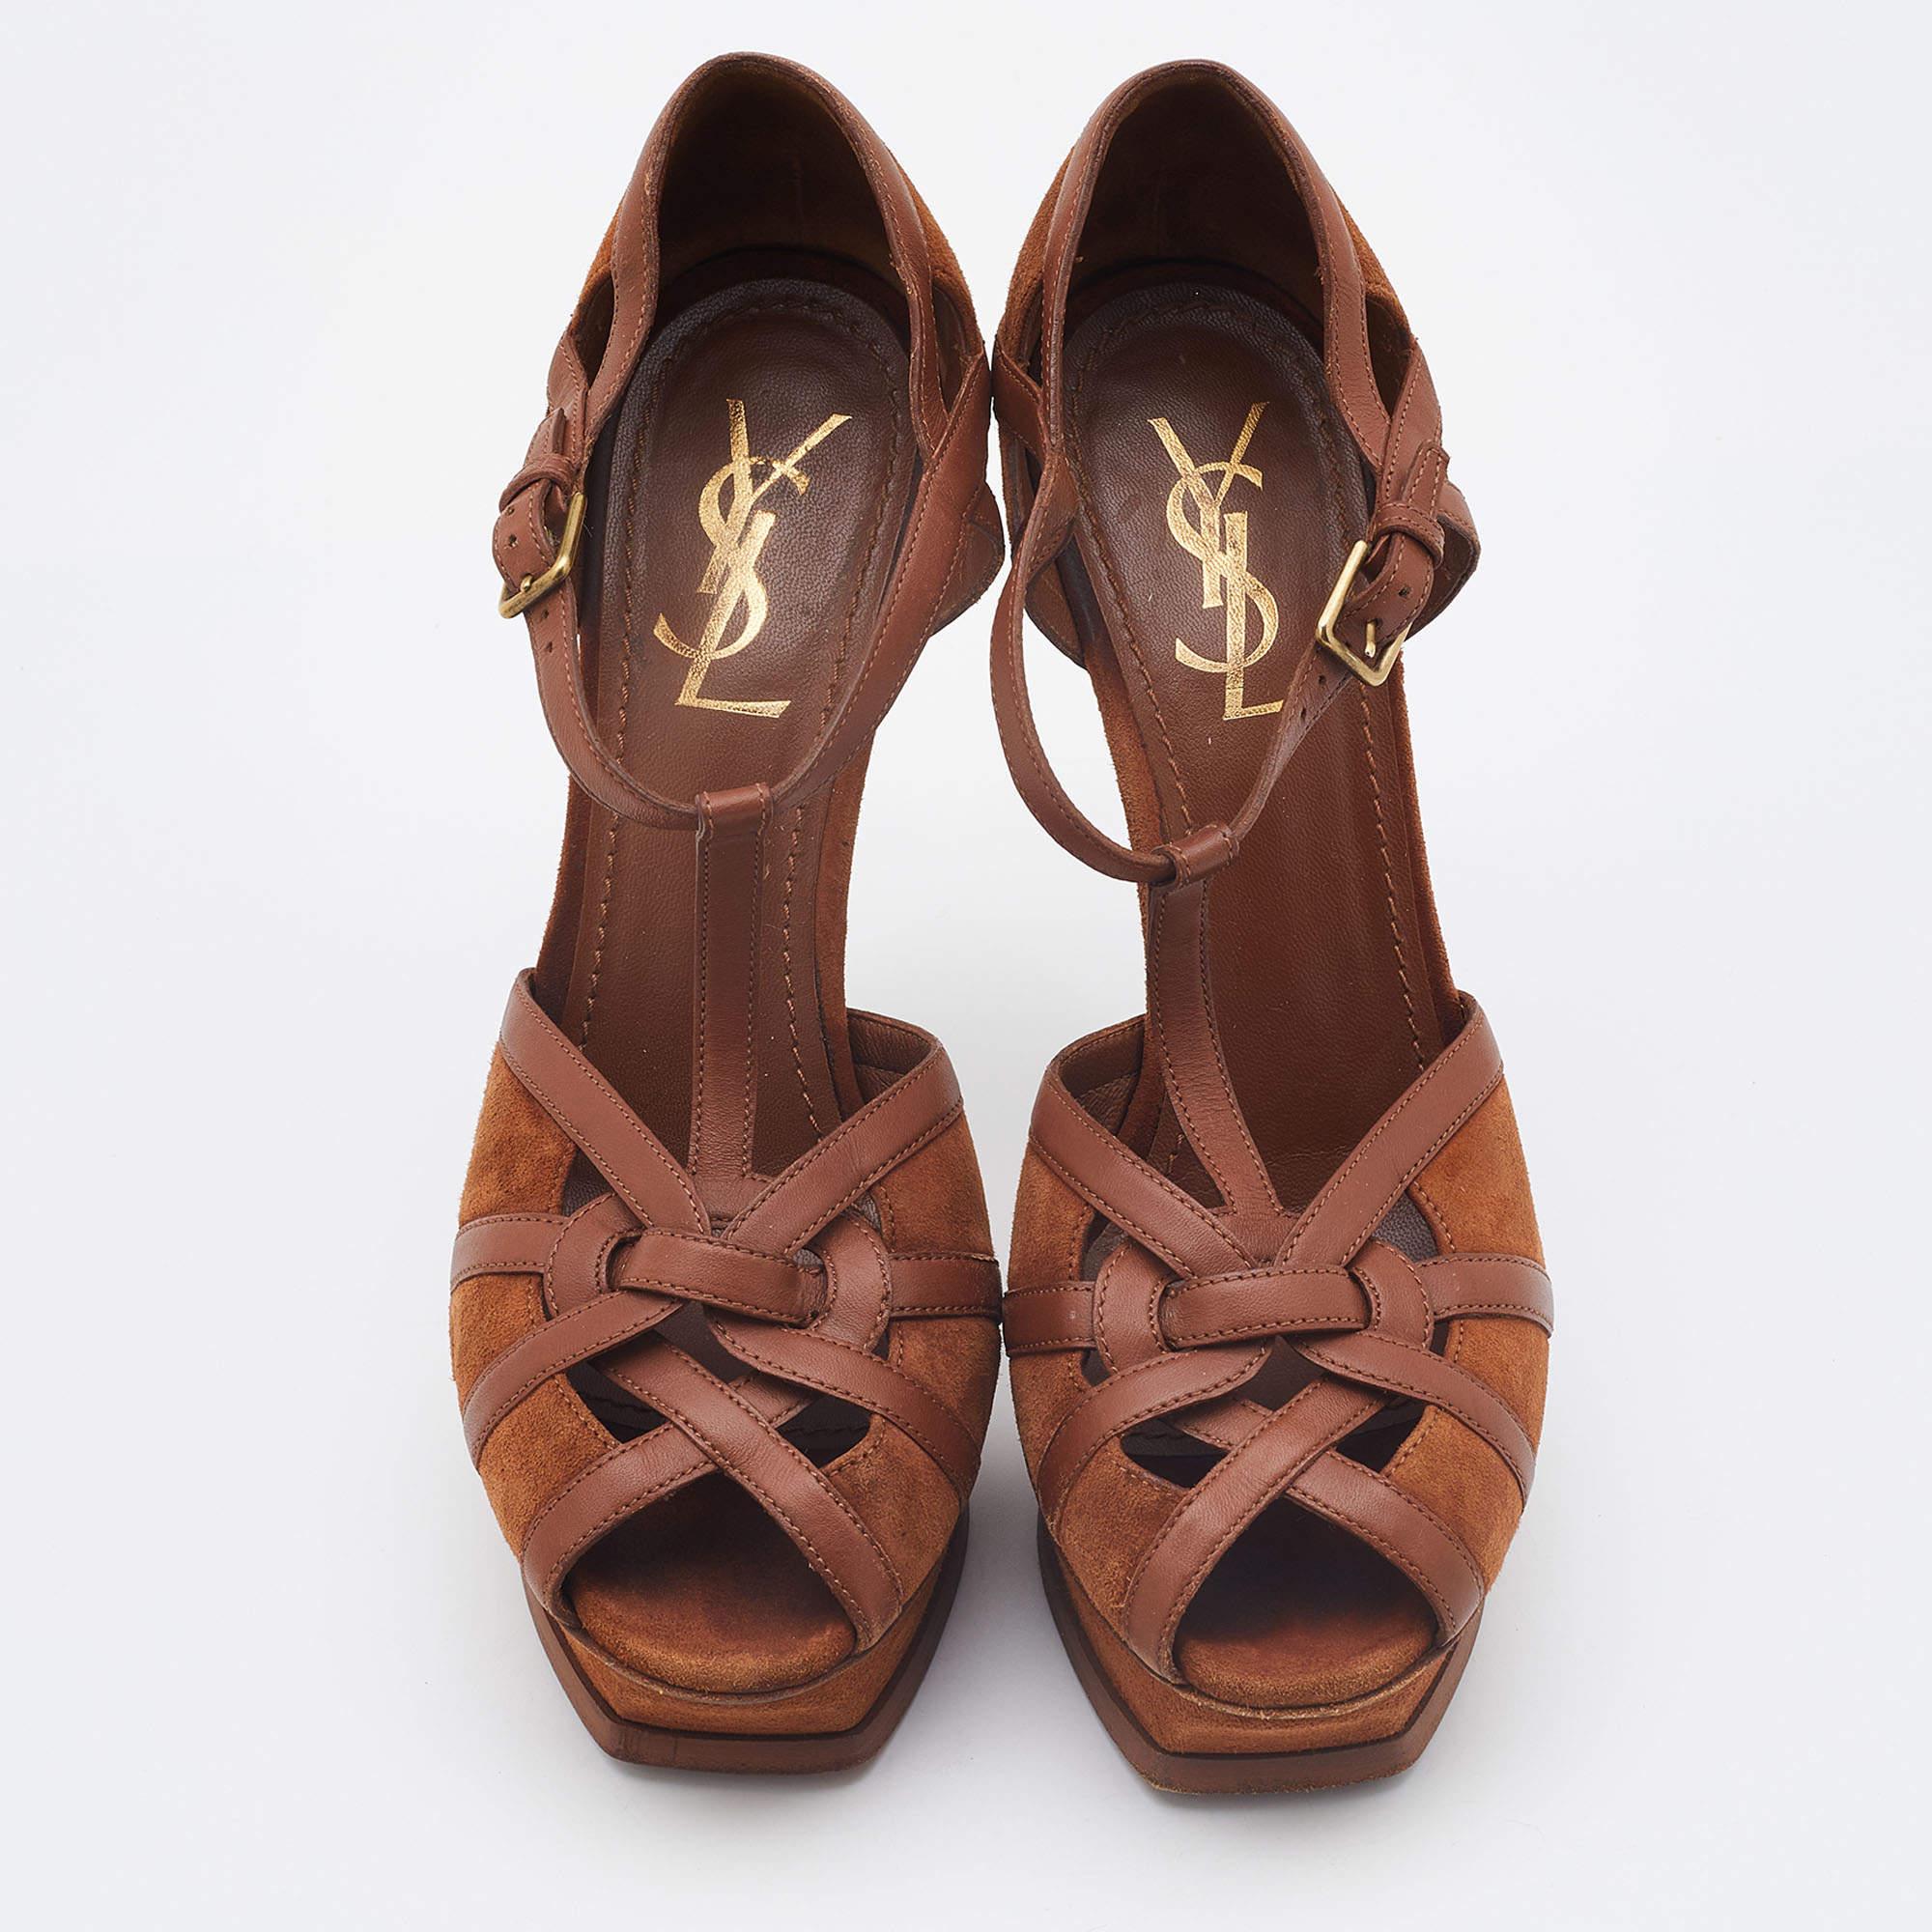 These Yves Saint Laurent sandals for women are meant to last you season after season. They have a comfortable fit and high-quality finish.

